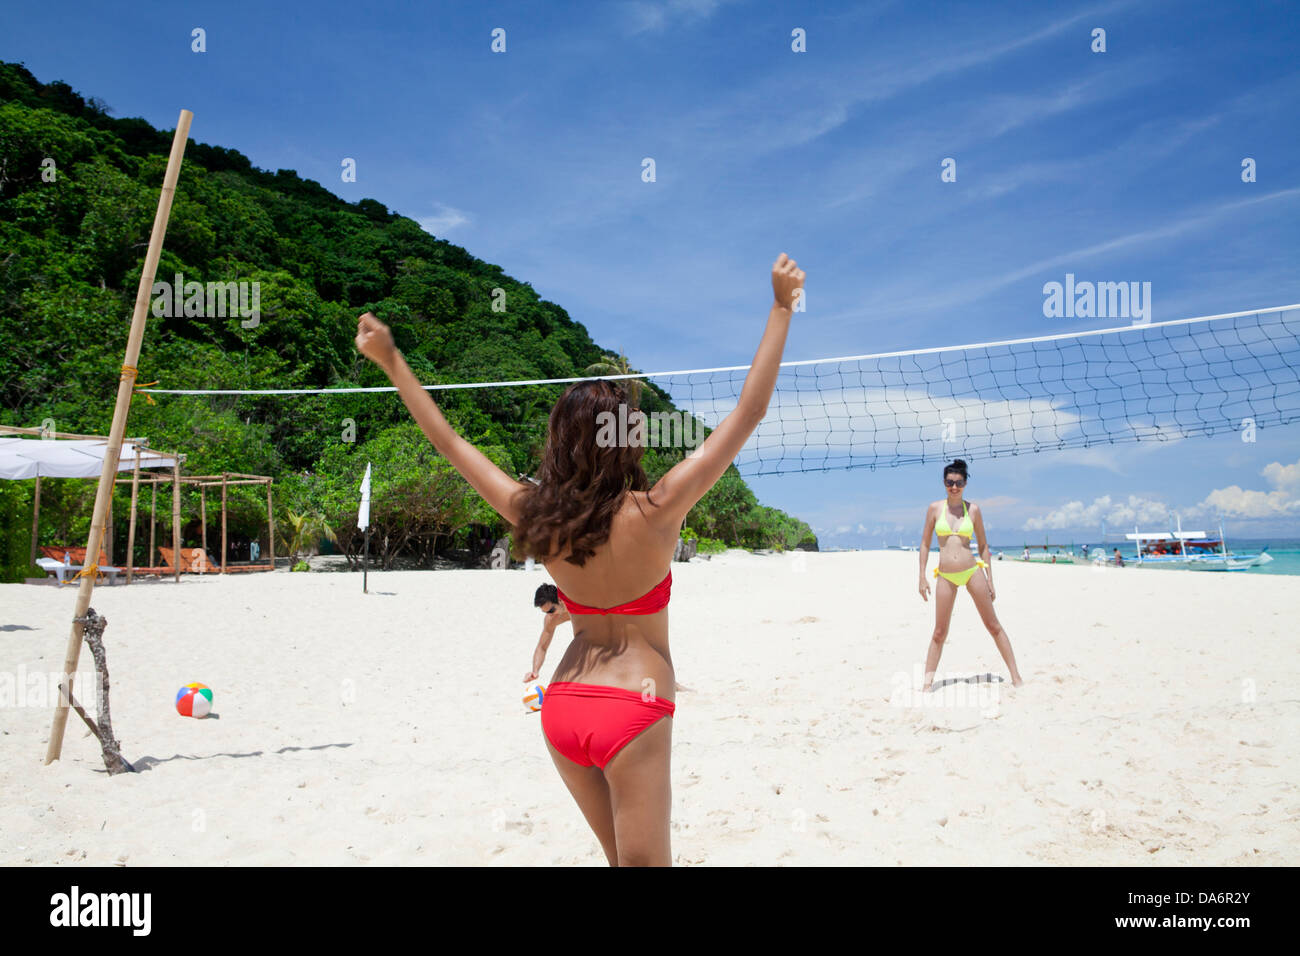 Friends playing beach volleyball. Stock Photo